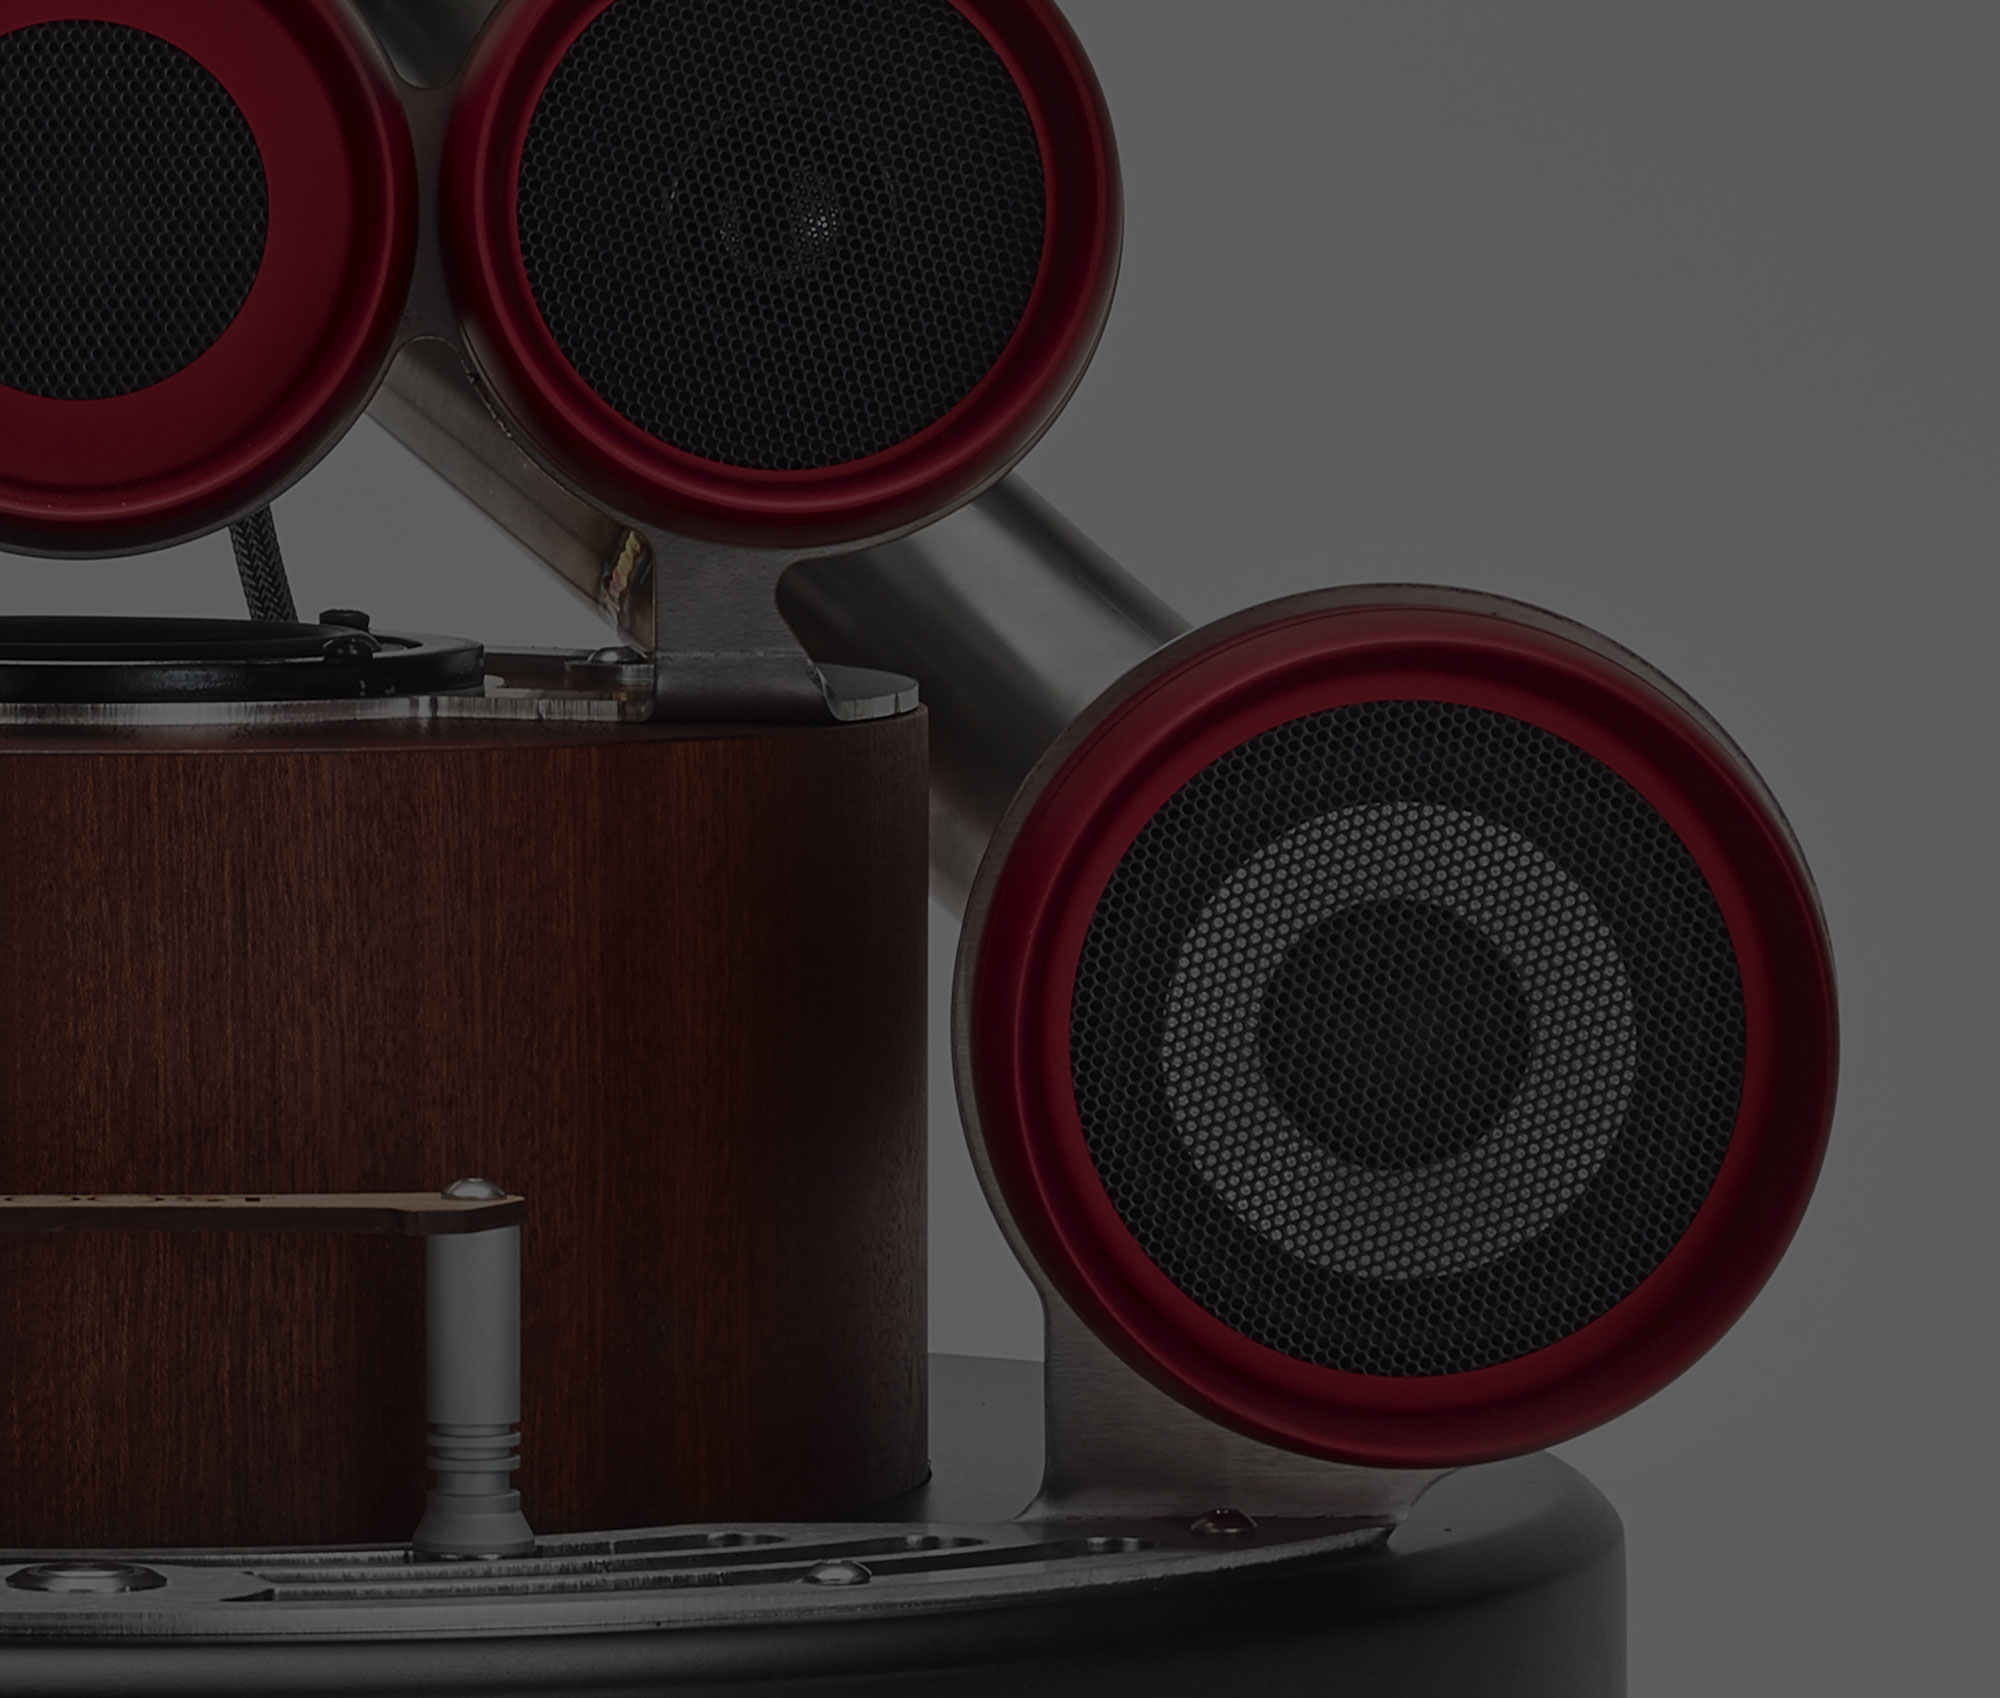 XiLO high end audio systems